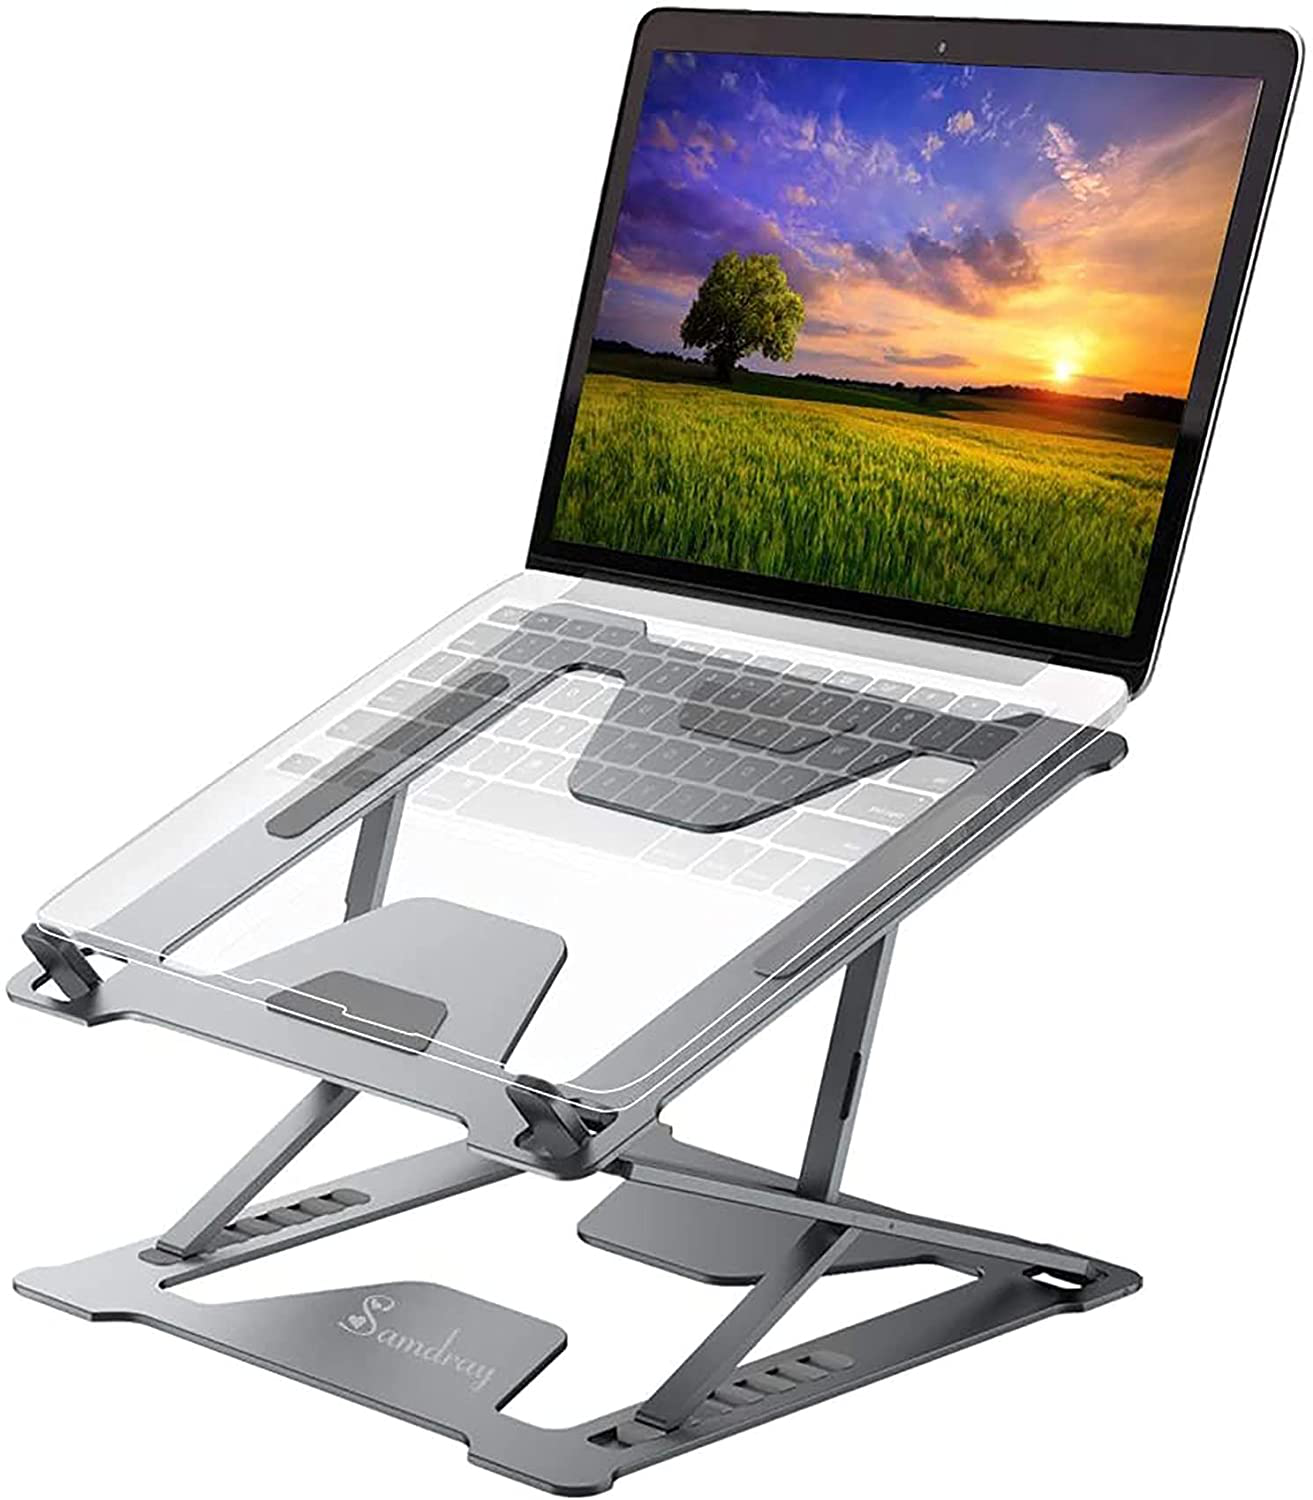 Laptop Stand, Foldable Portable Laptop Stand for Desk, Folding Laptop Stand Adjustable Height, Ergonomic Compatible with 11-17.3 ‘’Laptops